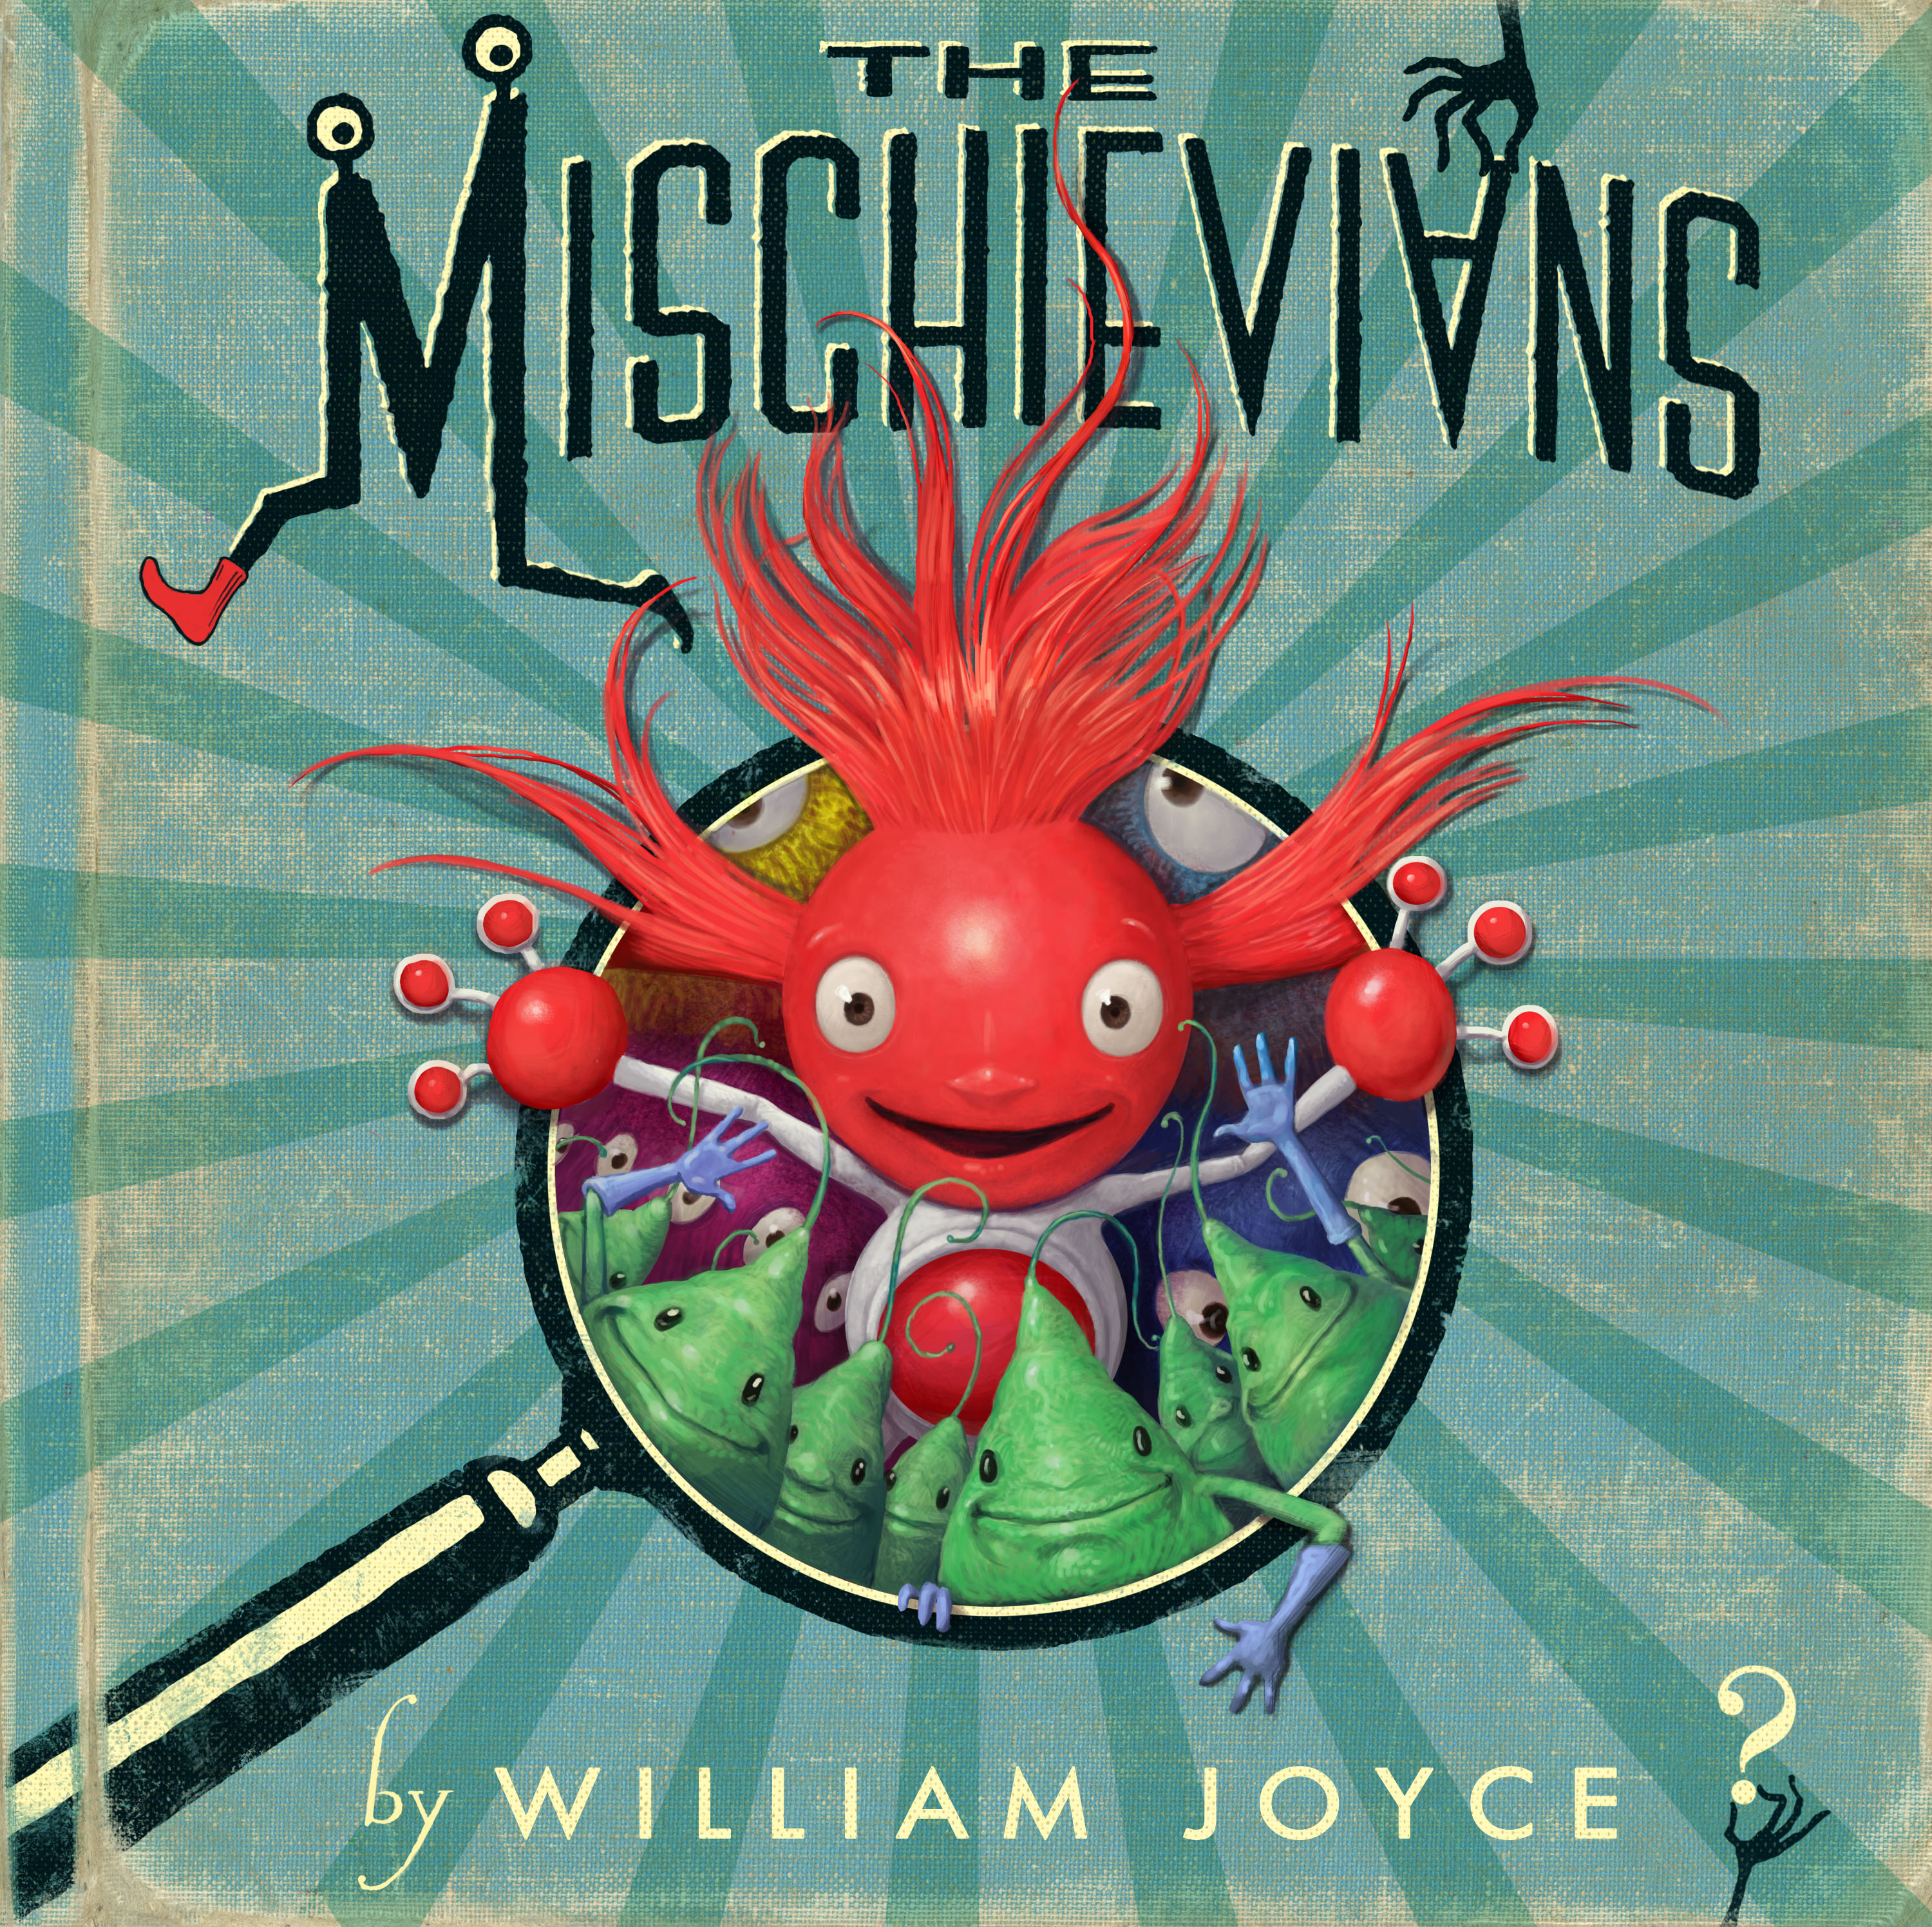 The Mischievians by William Joyce uncovers the creatures responsible for life's most embarrassing and frustrating circumstances.